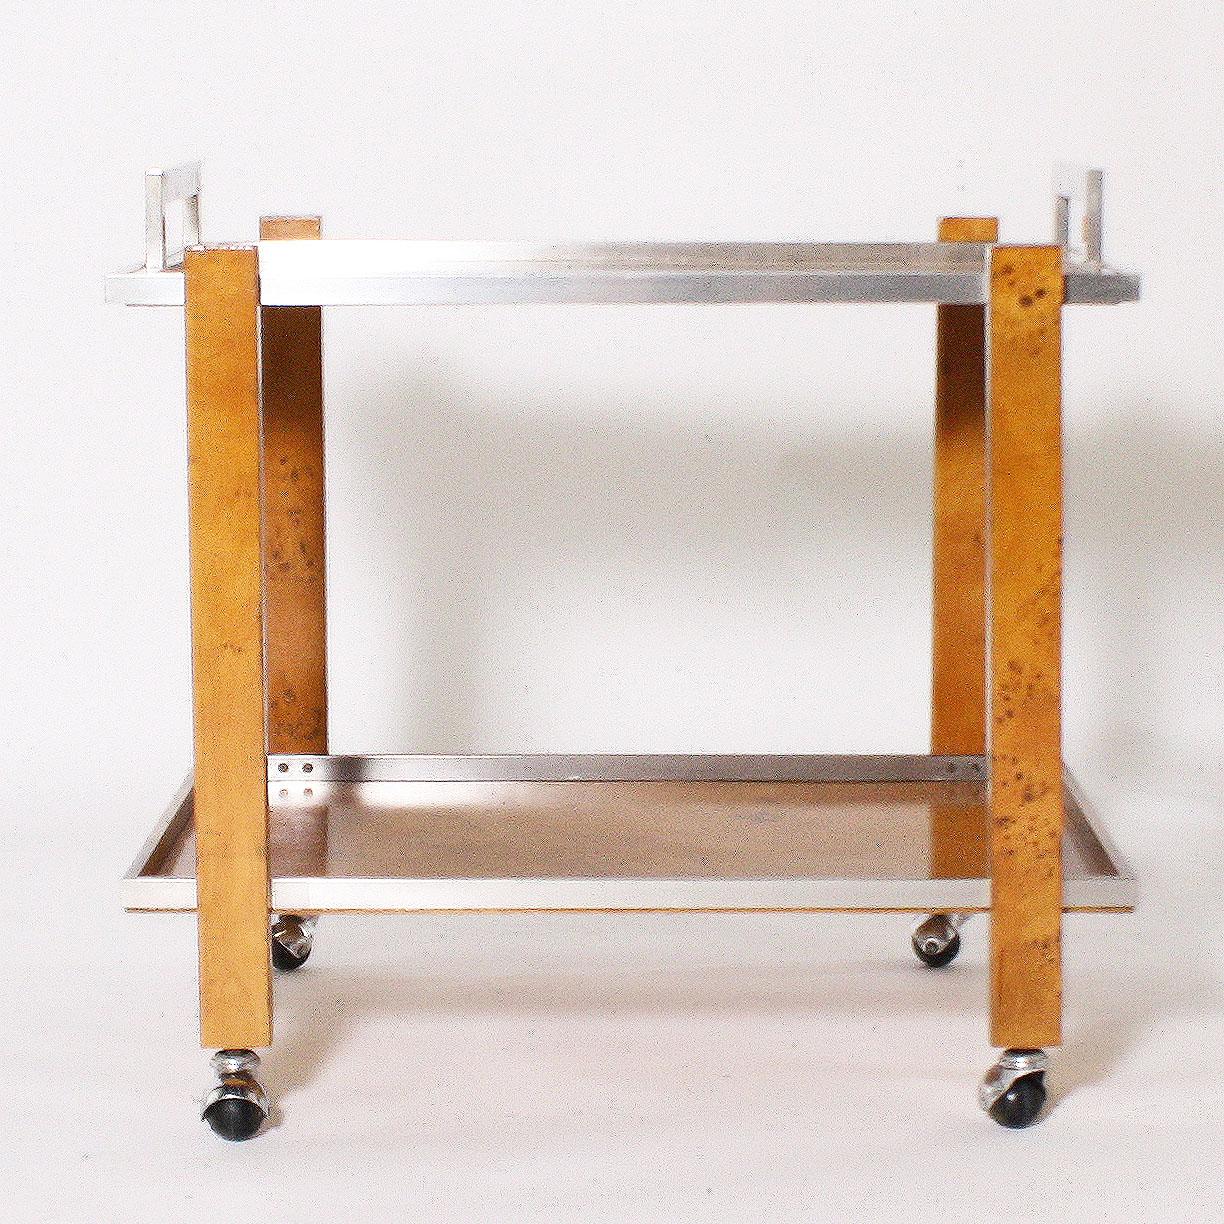 French bar cart by Willy Rizzo, circa 1970
Measures: 27 1/2